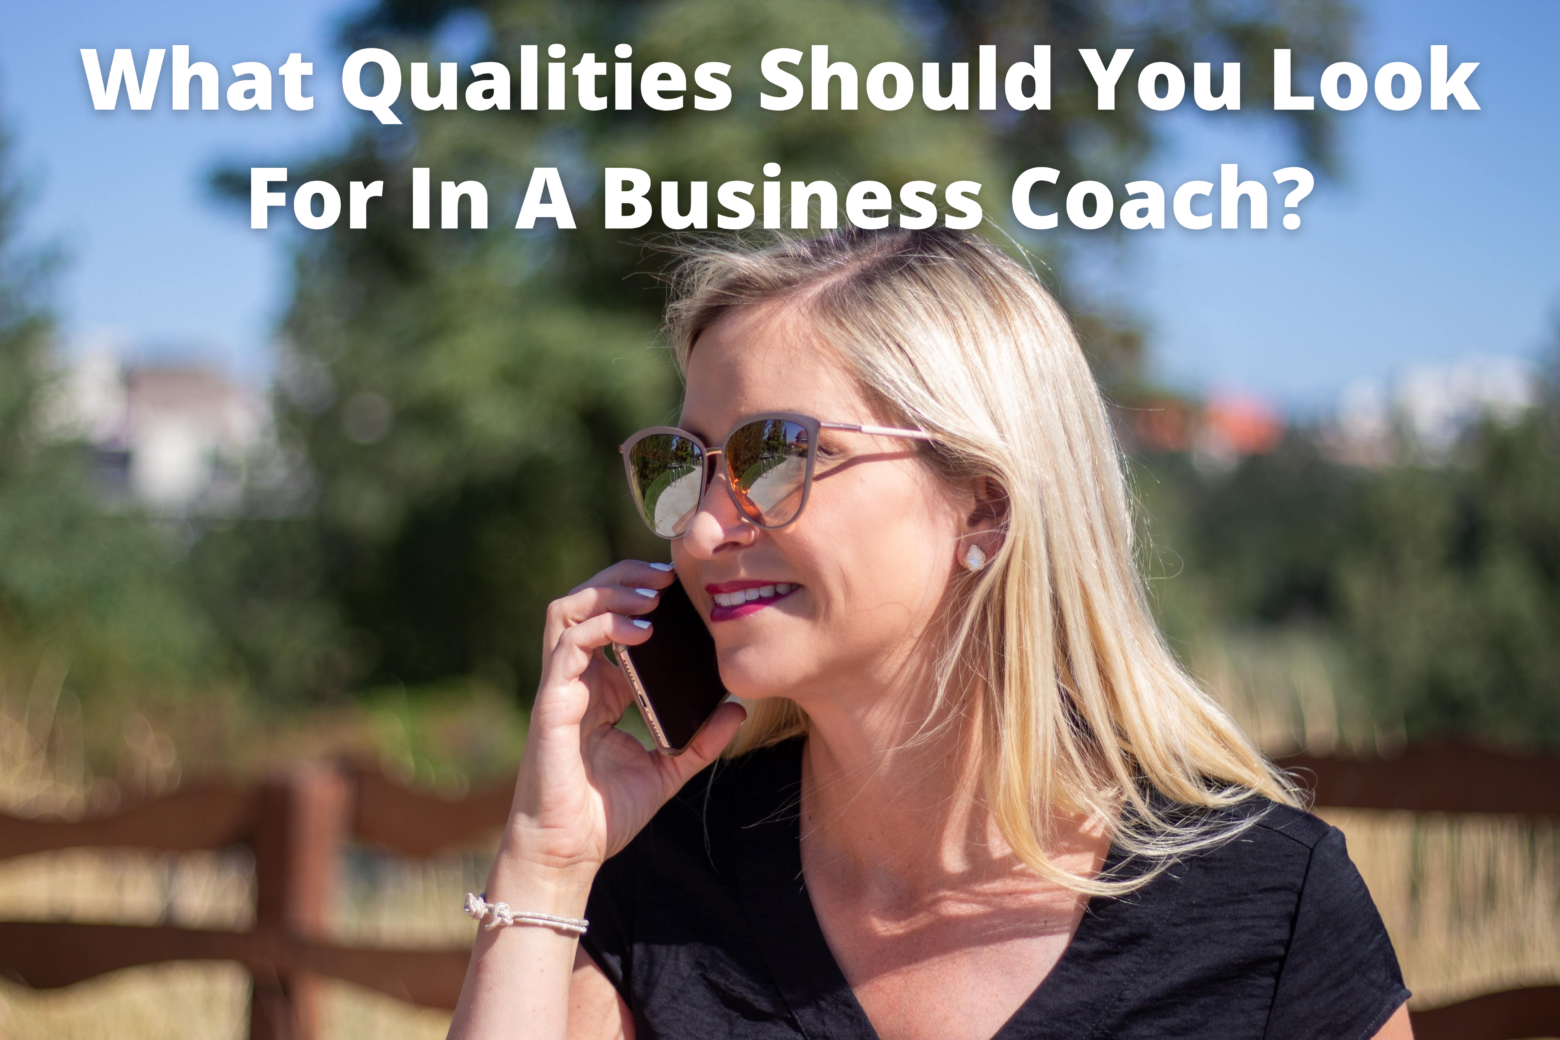 What Qualities Should You Look For In A Business Coach?